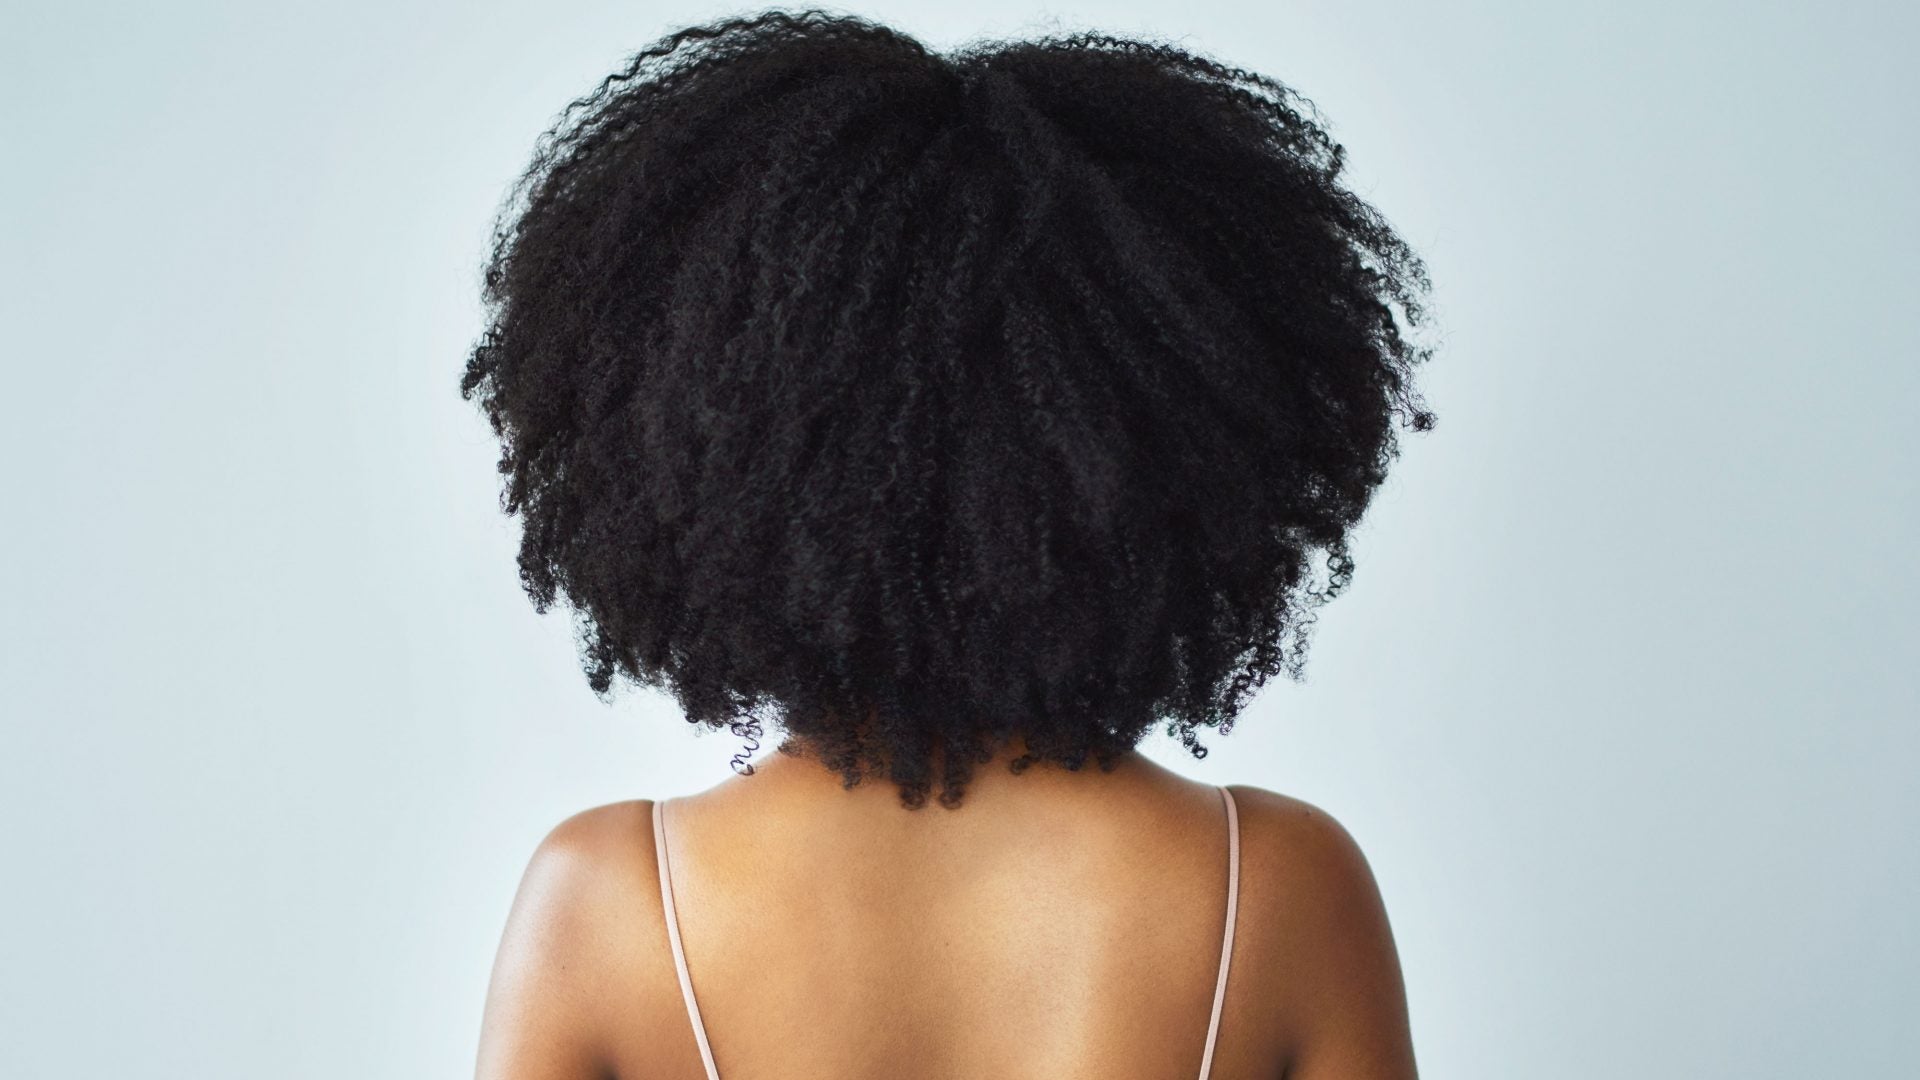 5 New Hair Gels That Won't Leave Your Curls Crunchy